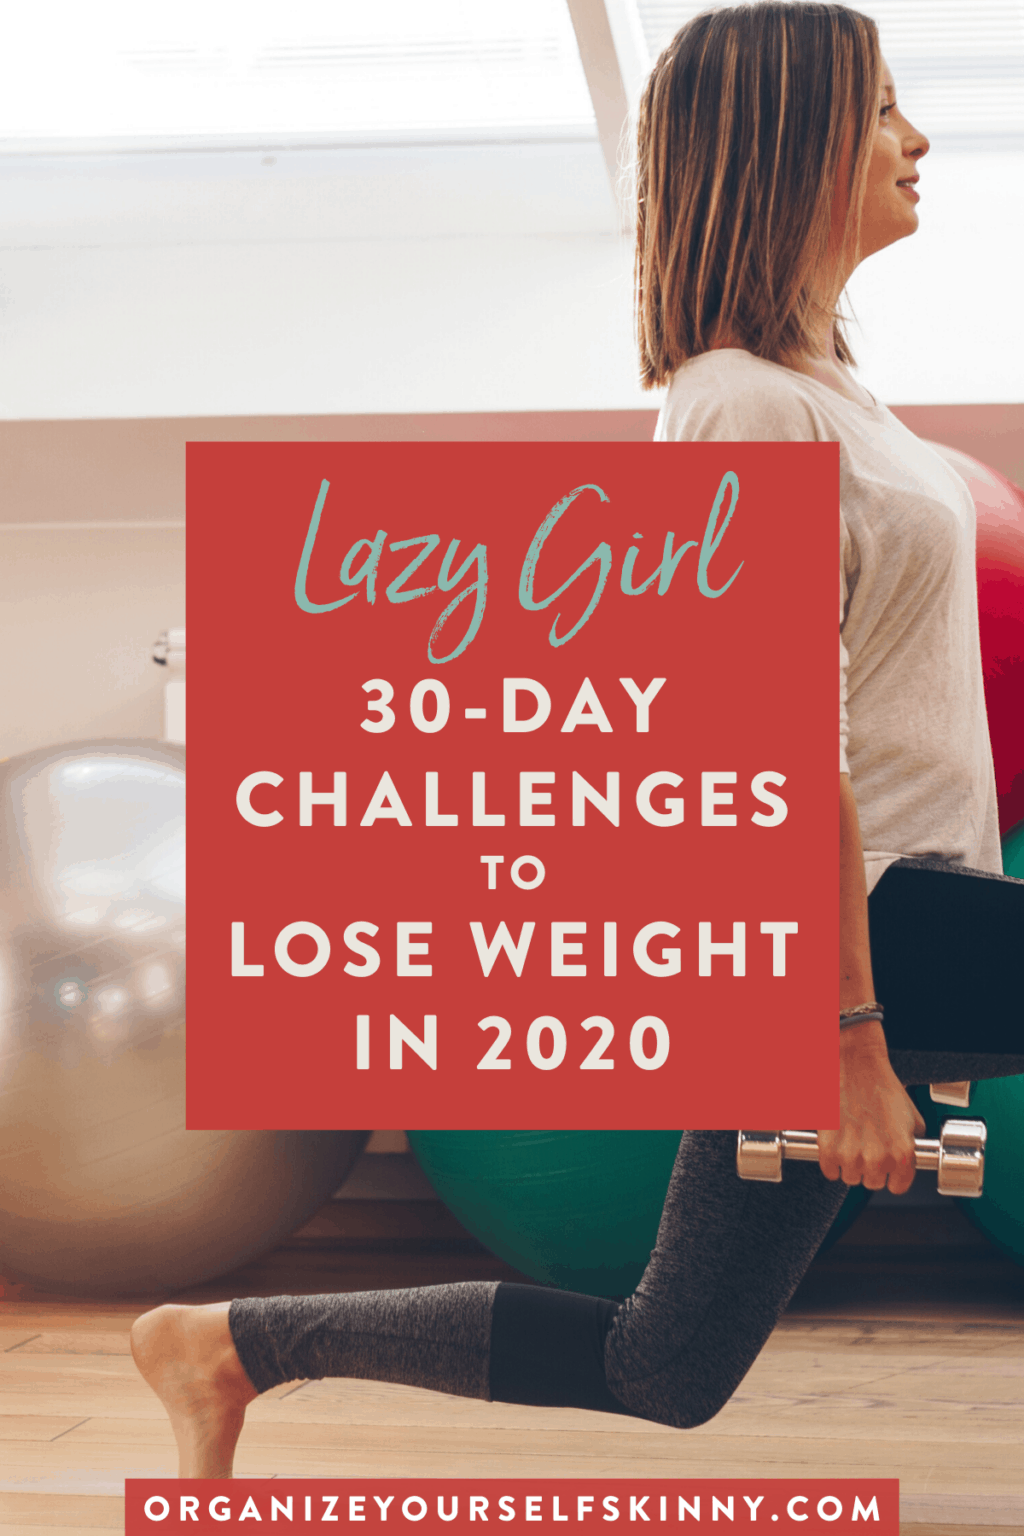 7 Mini 'Lazy Girl' Weight Loss Challenge Ideas - Organize Yourself Skinny